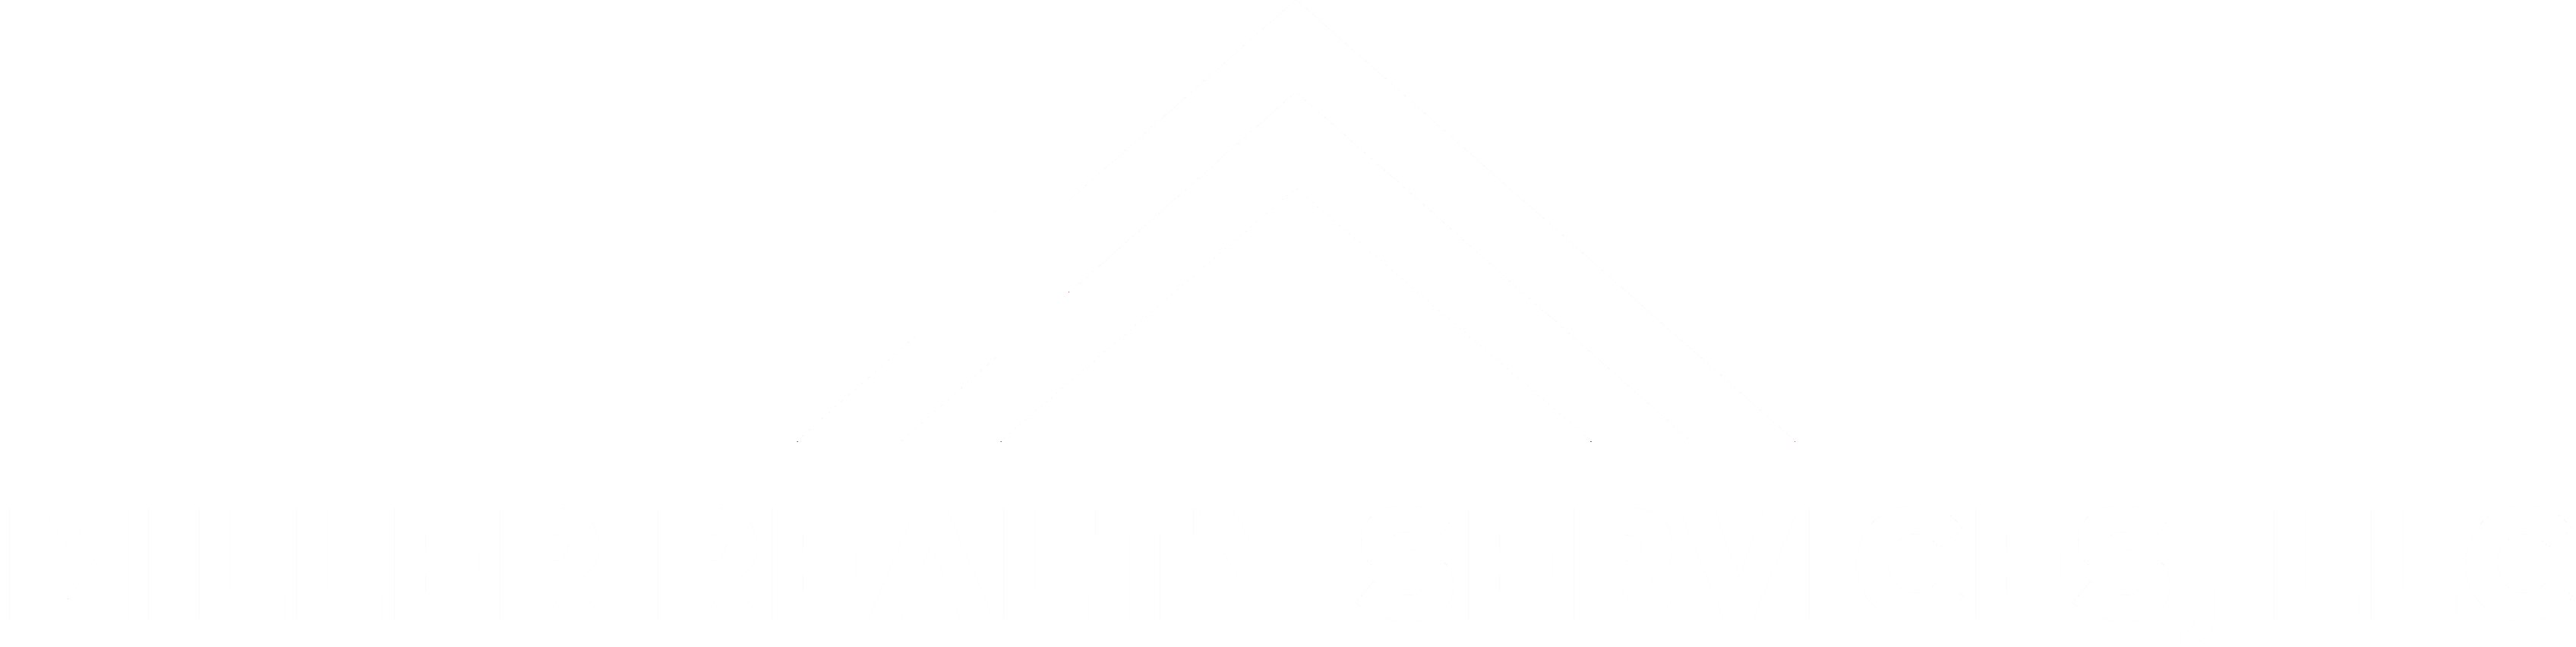 Miller Realty Services